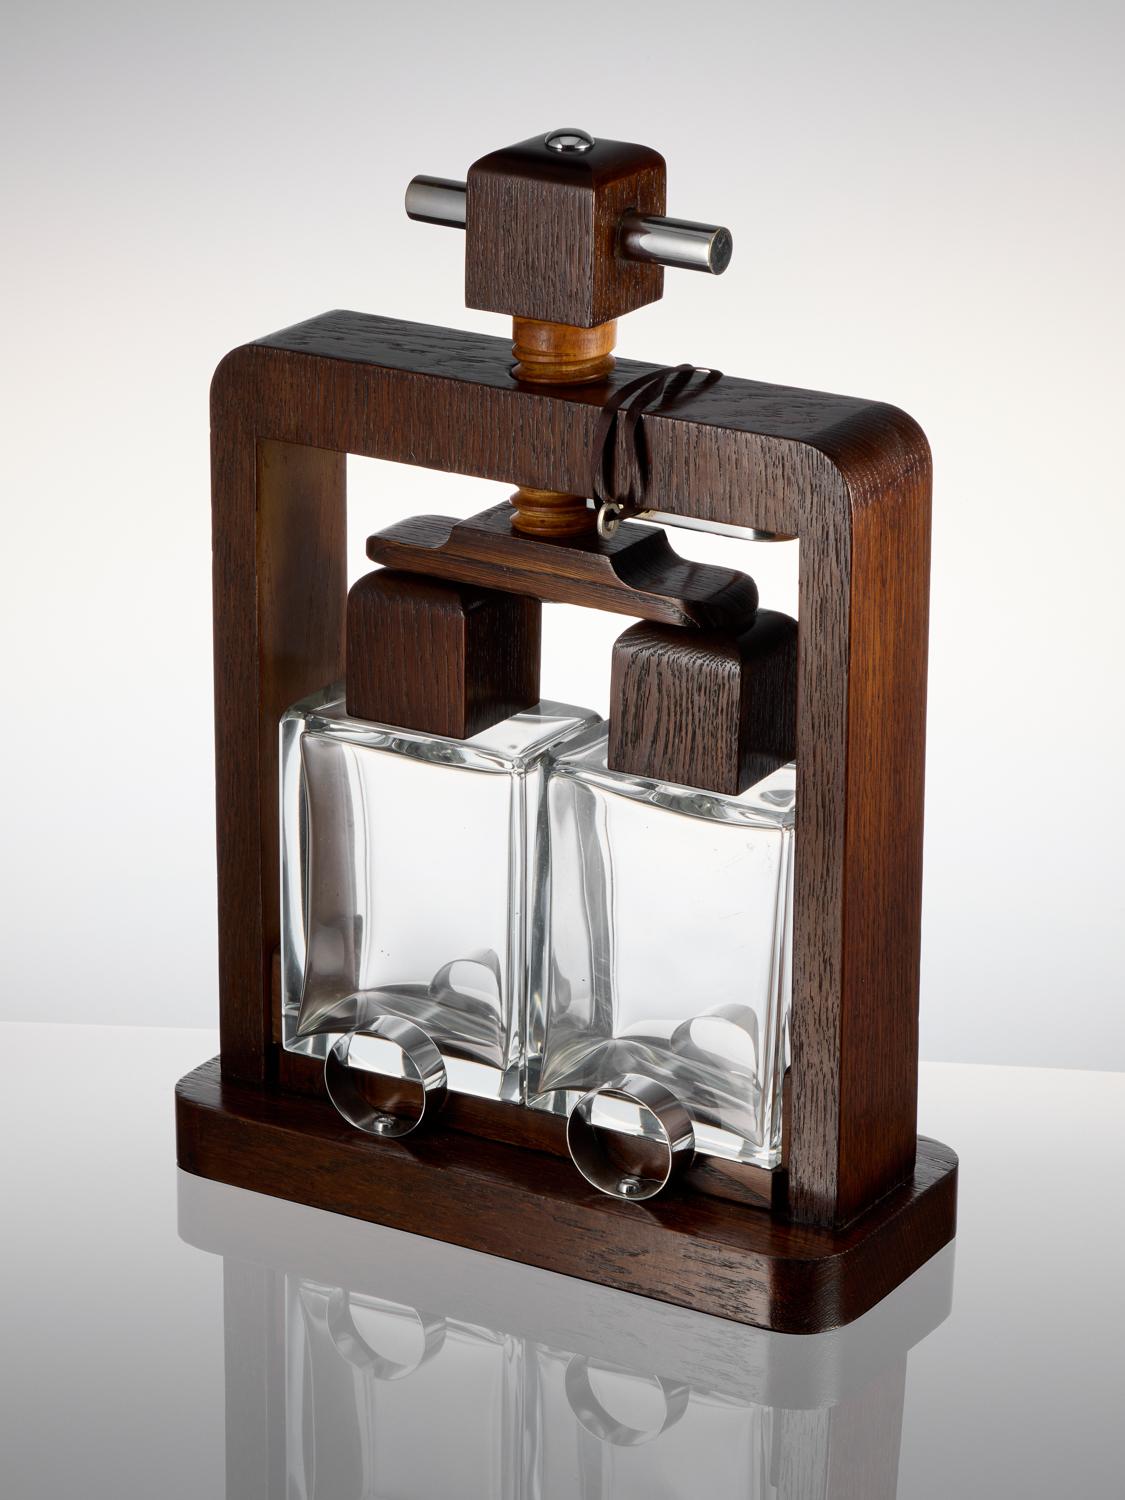 Presenting a rare and impressive Art Deco pair of mounted decanters in a tantalus from France, dating back to circa 1930.

This unique drinks tantalus features a pair of decanters elegantly mounted within a press-like structure. By turning the